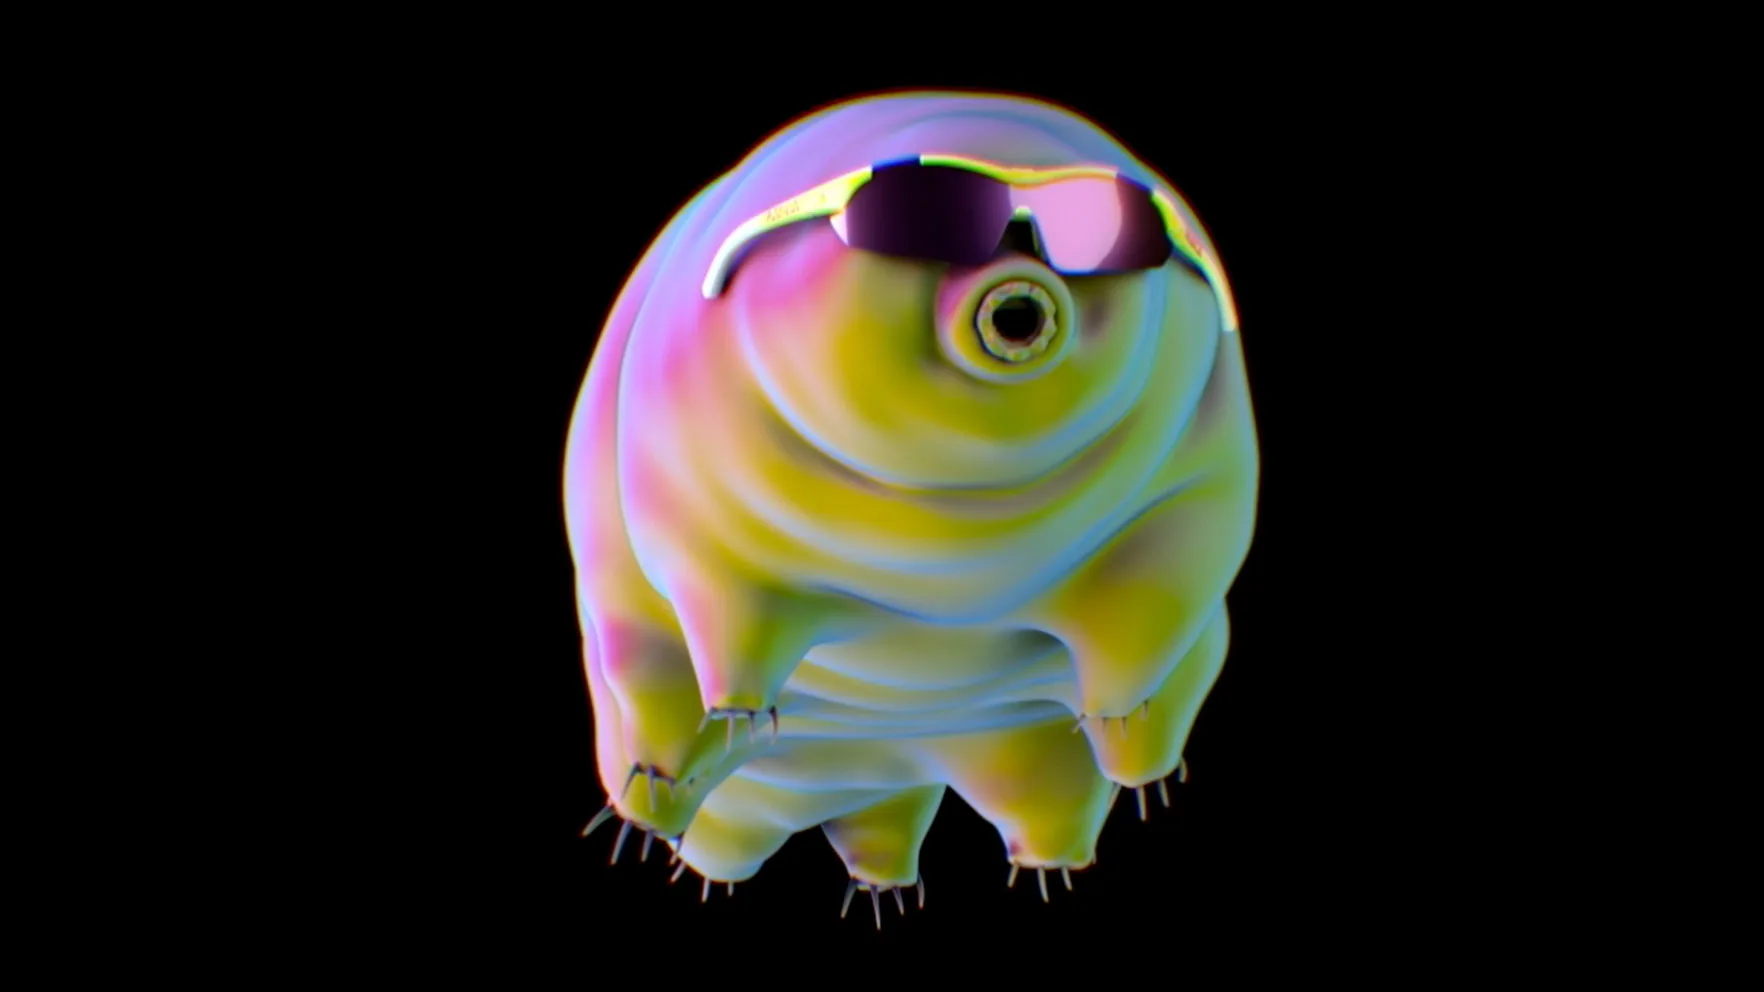 A cute and luminous waterbear with lots of legs, wearing sunglasses.